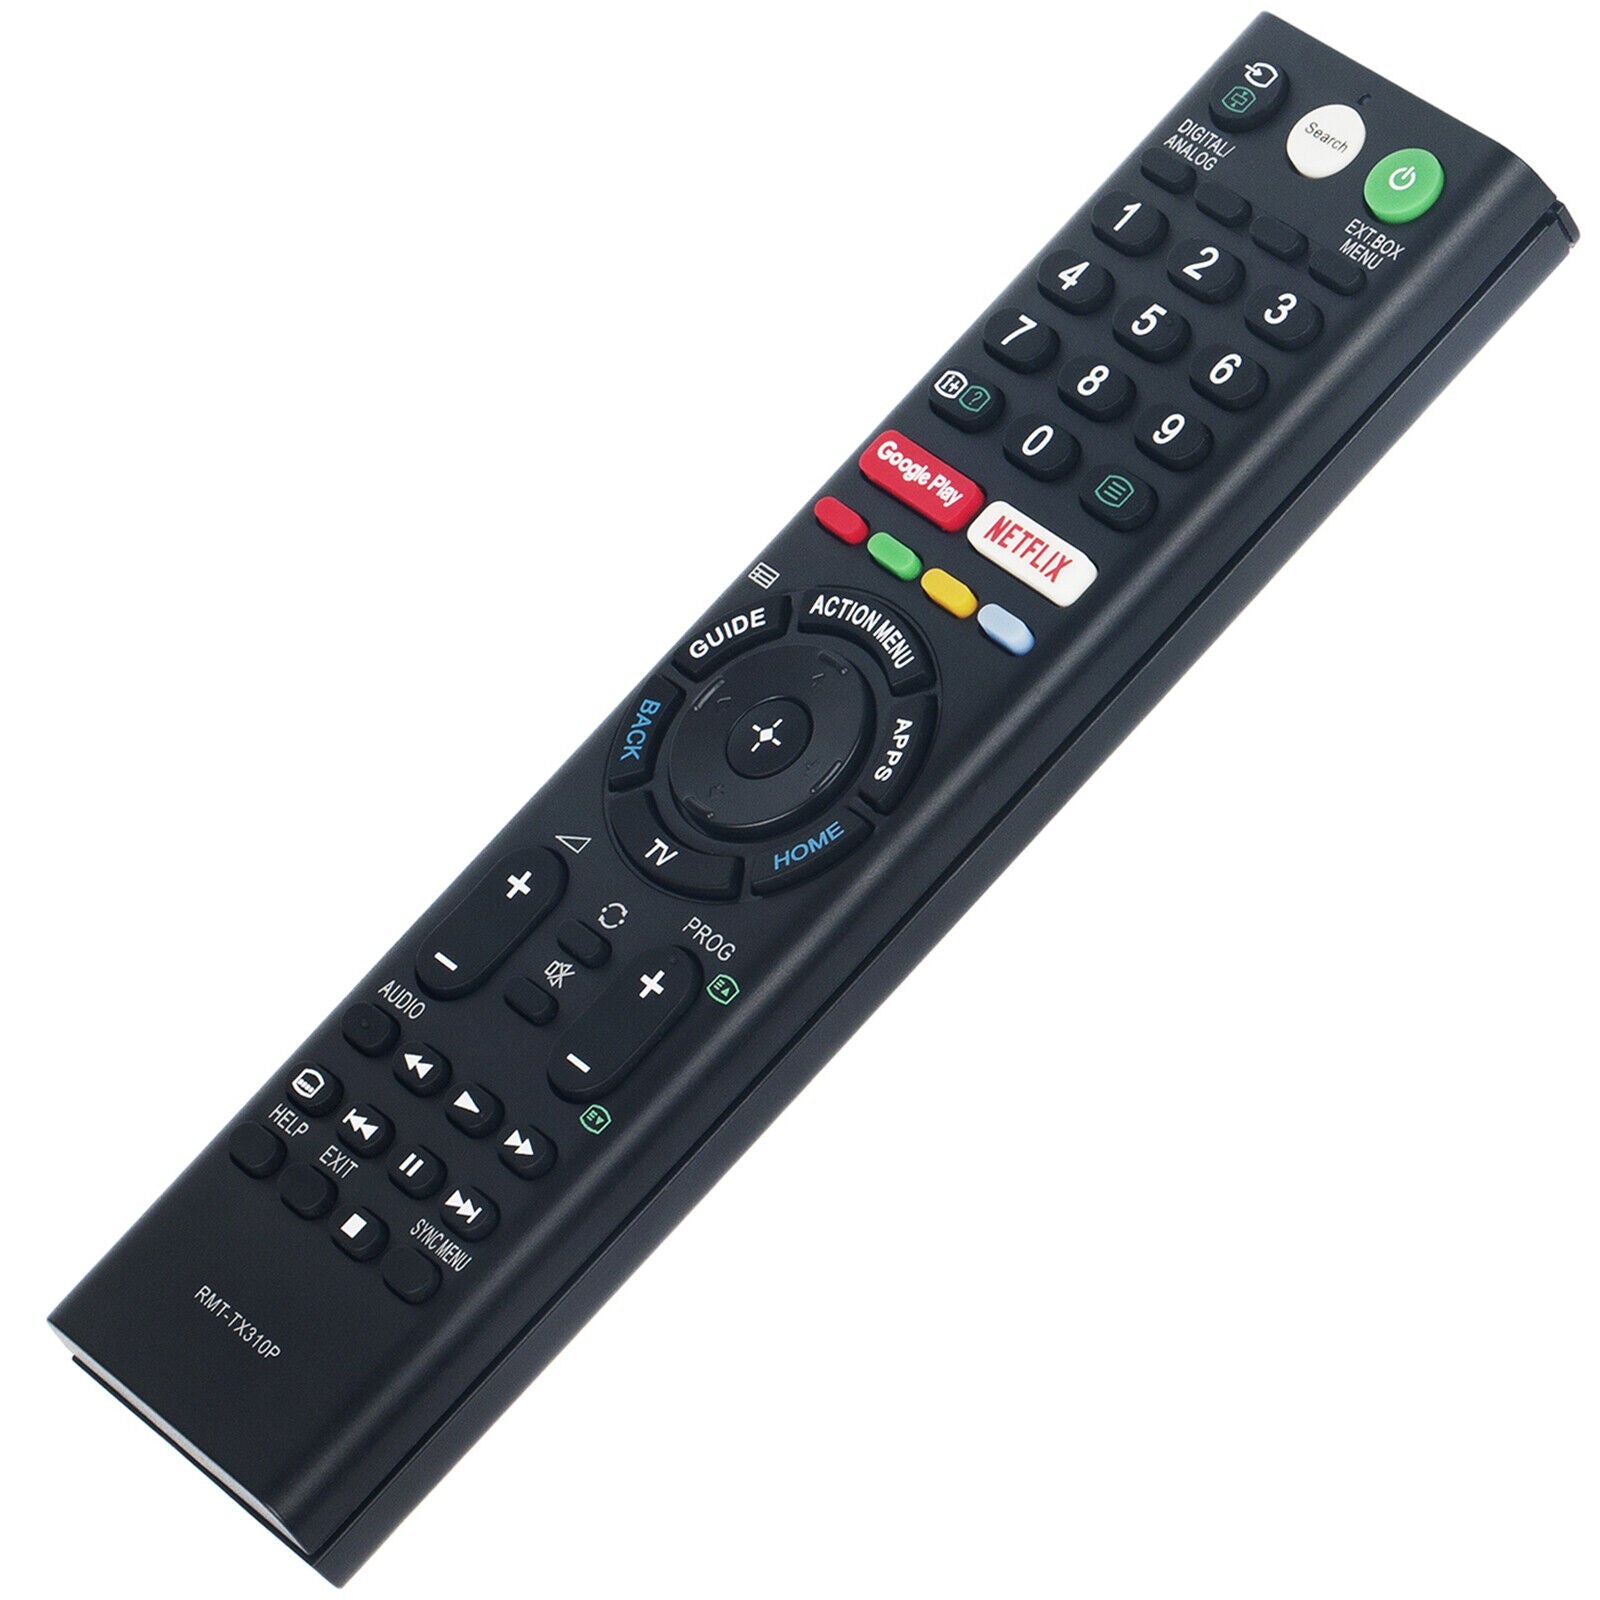 RMF-TX310P Voice Remote Control fit for Sony Bravia LED TV KD-55A8G KD-65A8G KD-75X8000G KD-65X8000G KD-55X8000G KD-49X8000G KD-43X8000G KD-65X8077G KD-55X8077G KD-65X7500F KD-55X7500F KD-49X7500F - Office Catch